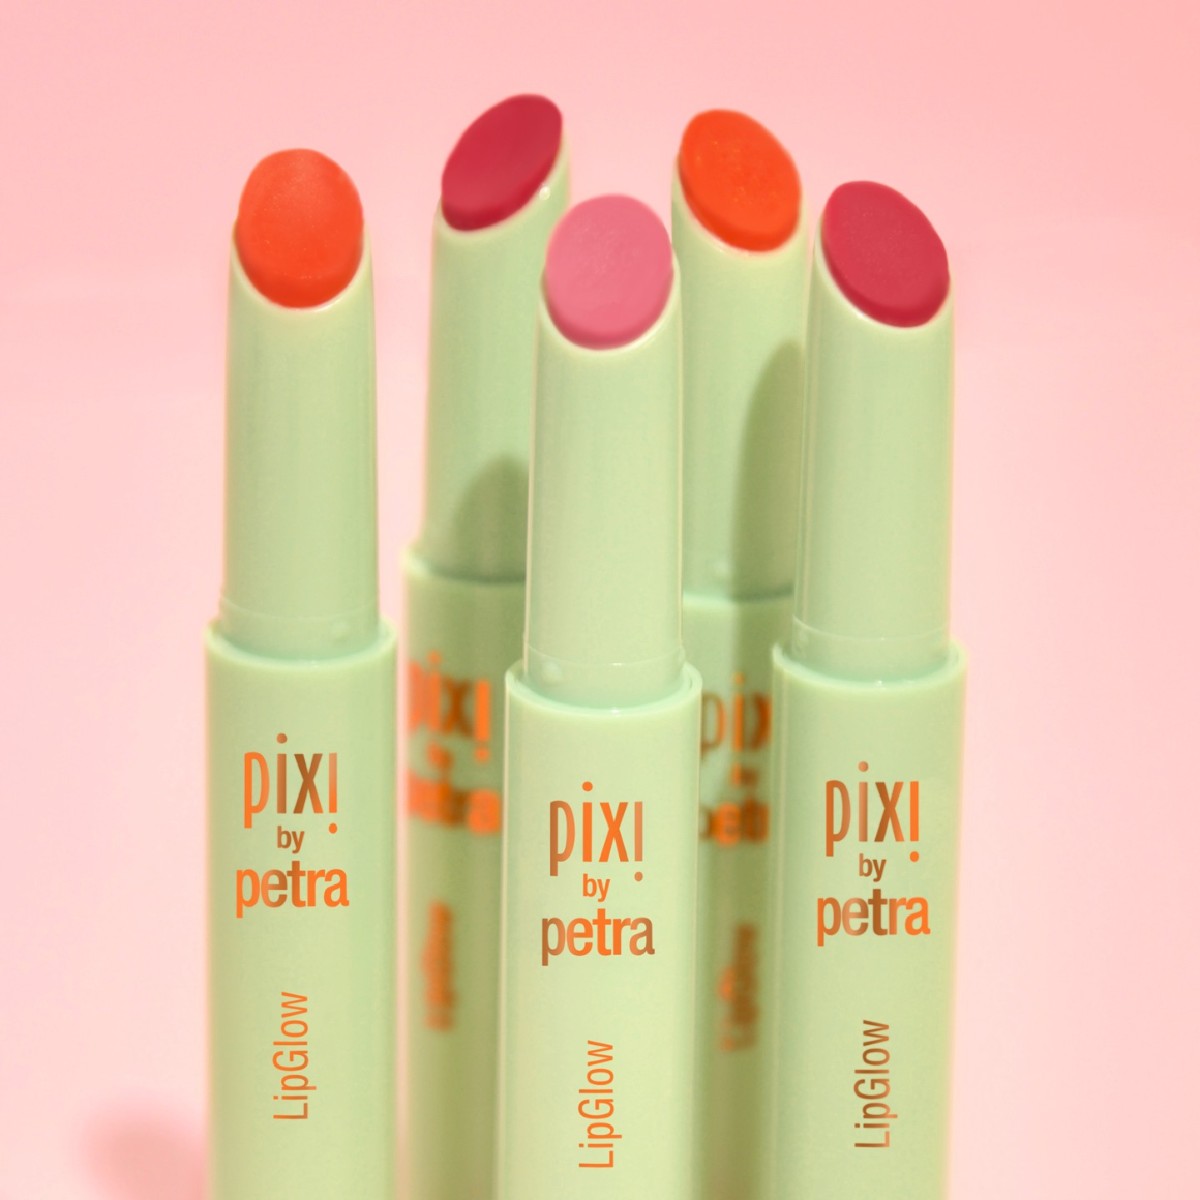 Get your (Lip)Glow on! 😉💖 Created with Shea Butter and Mango to pamper, condition and smooth, these buildable balms leave the lips softer after every use! Available in 3 #PixiPerfect dewy hues!

💚 Juicy
💚 Ruby
💚 Fleur

#PixiBeauty #Makeup #PixiGlow #LipColour